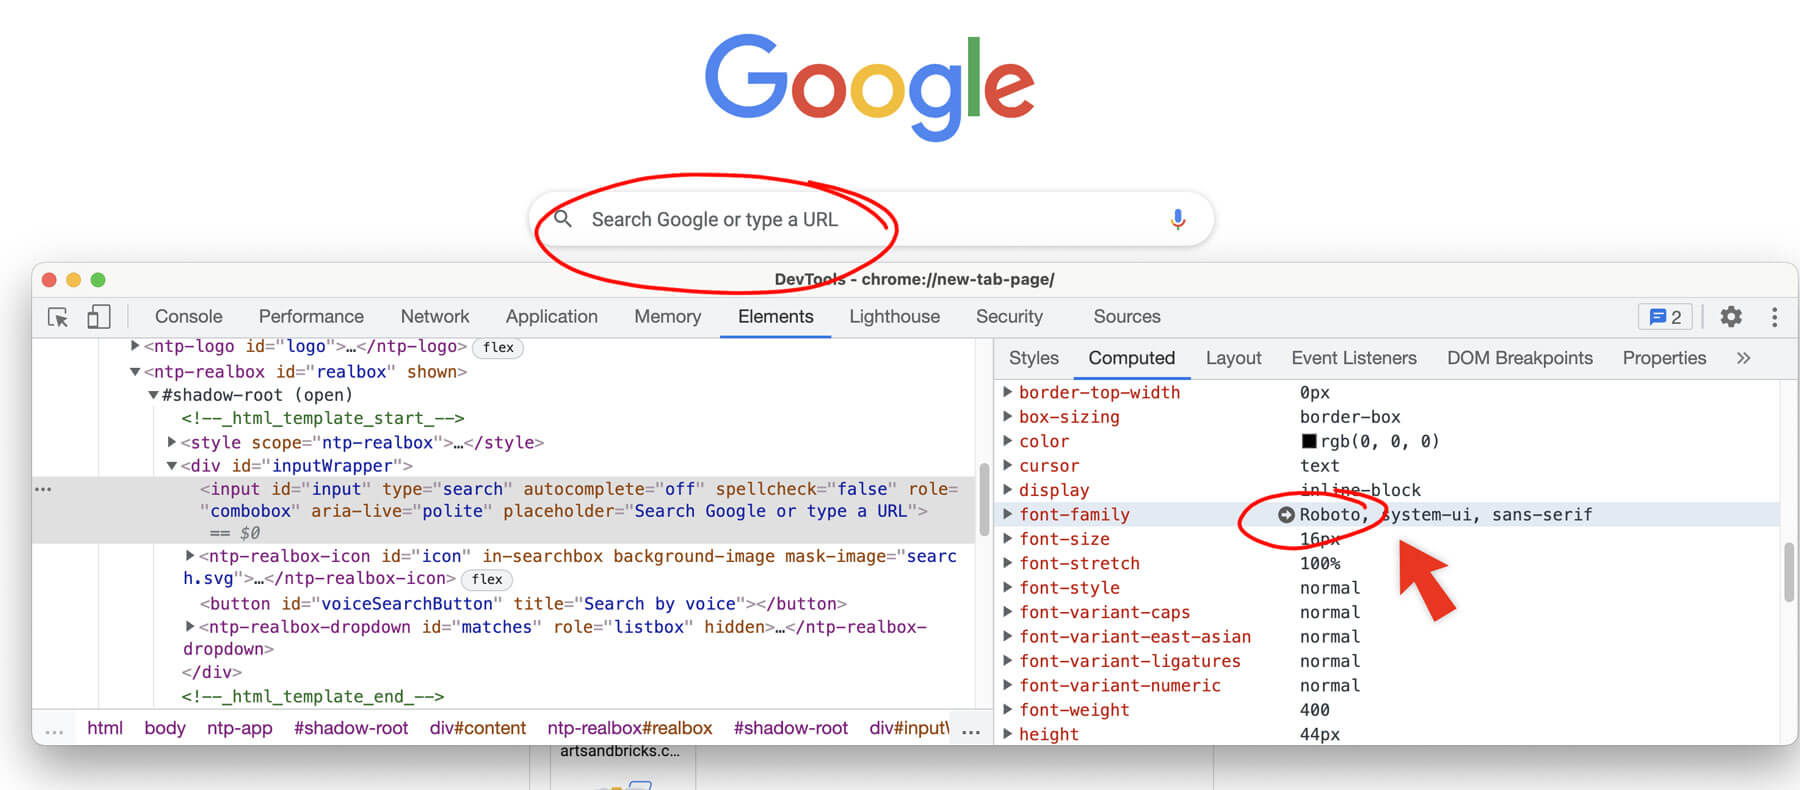 Google's start page looks for Roboto, then system-ui, then sans serif for the font stack.